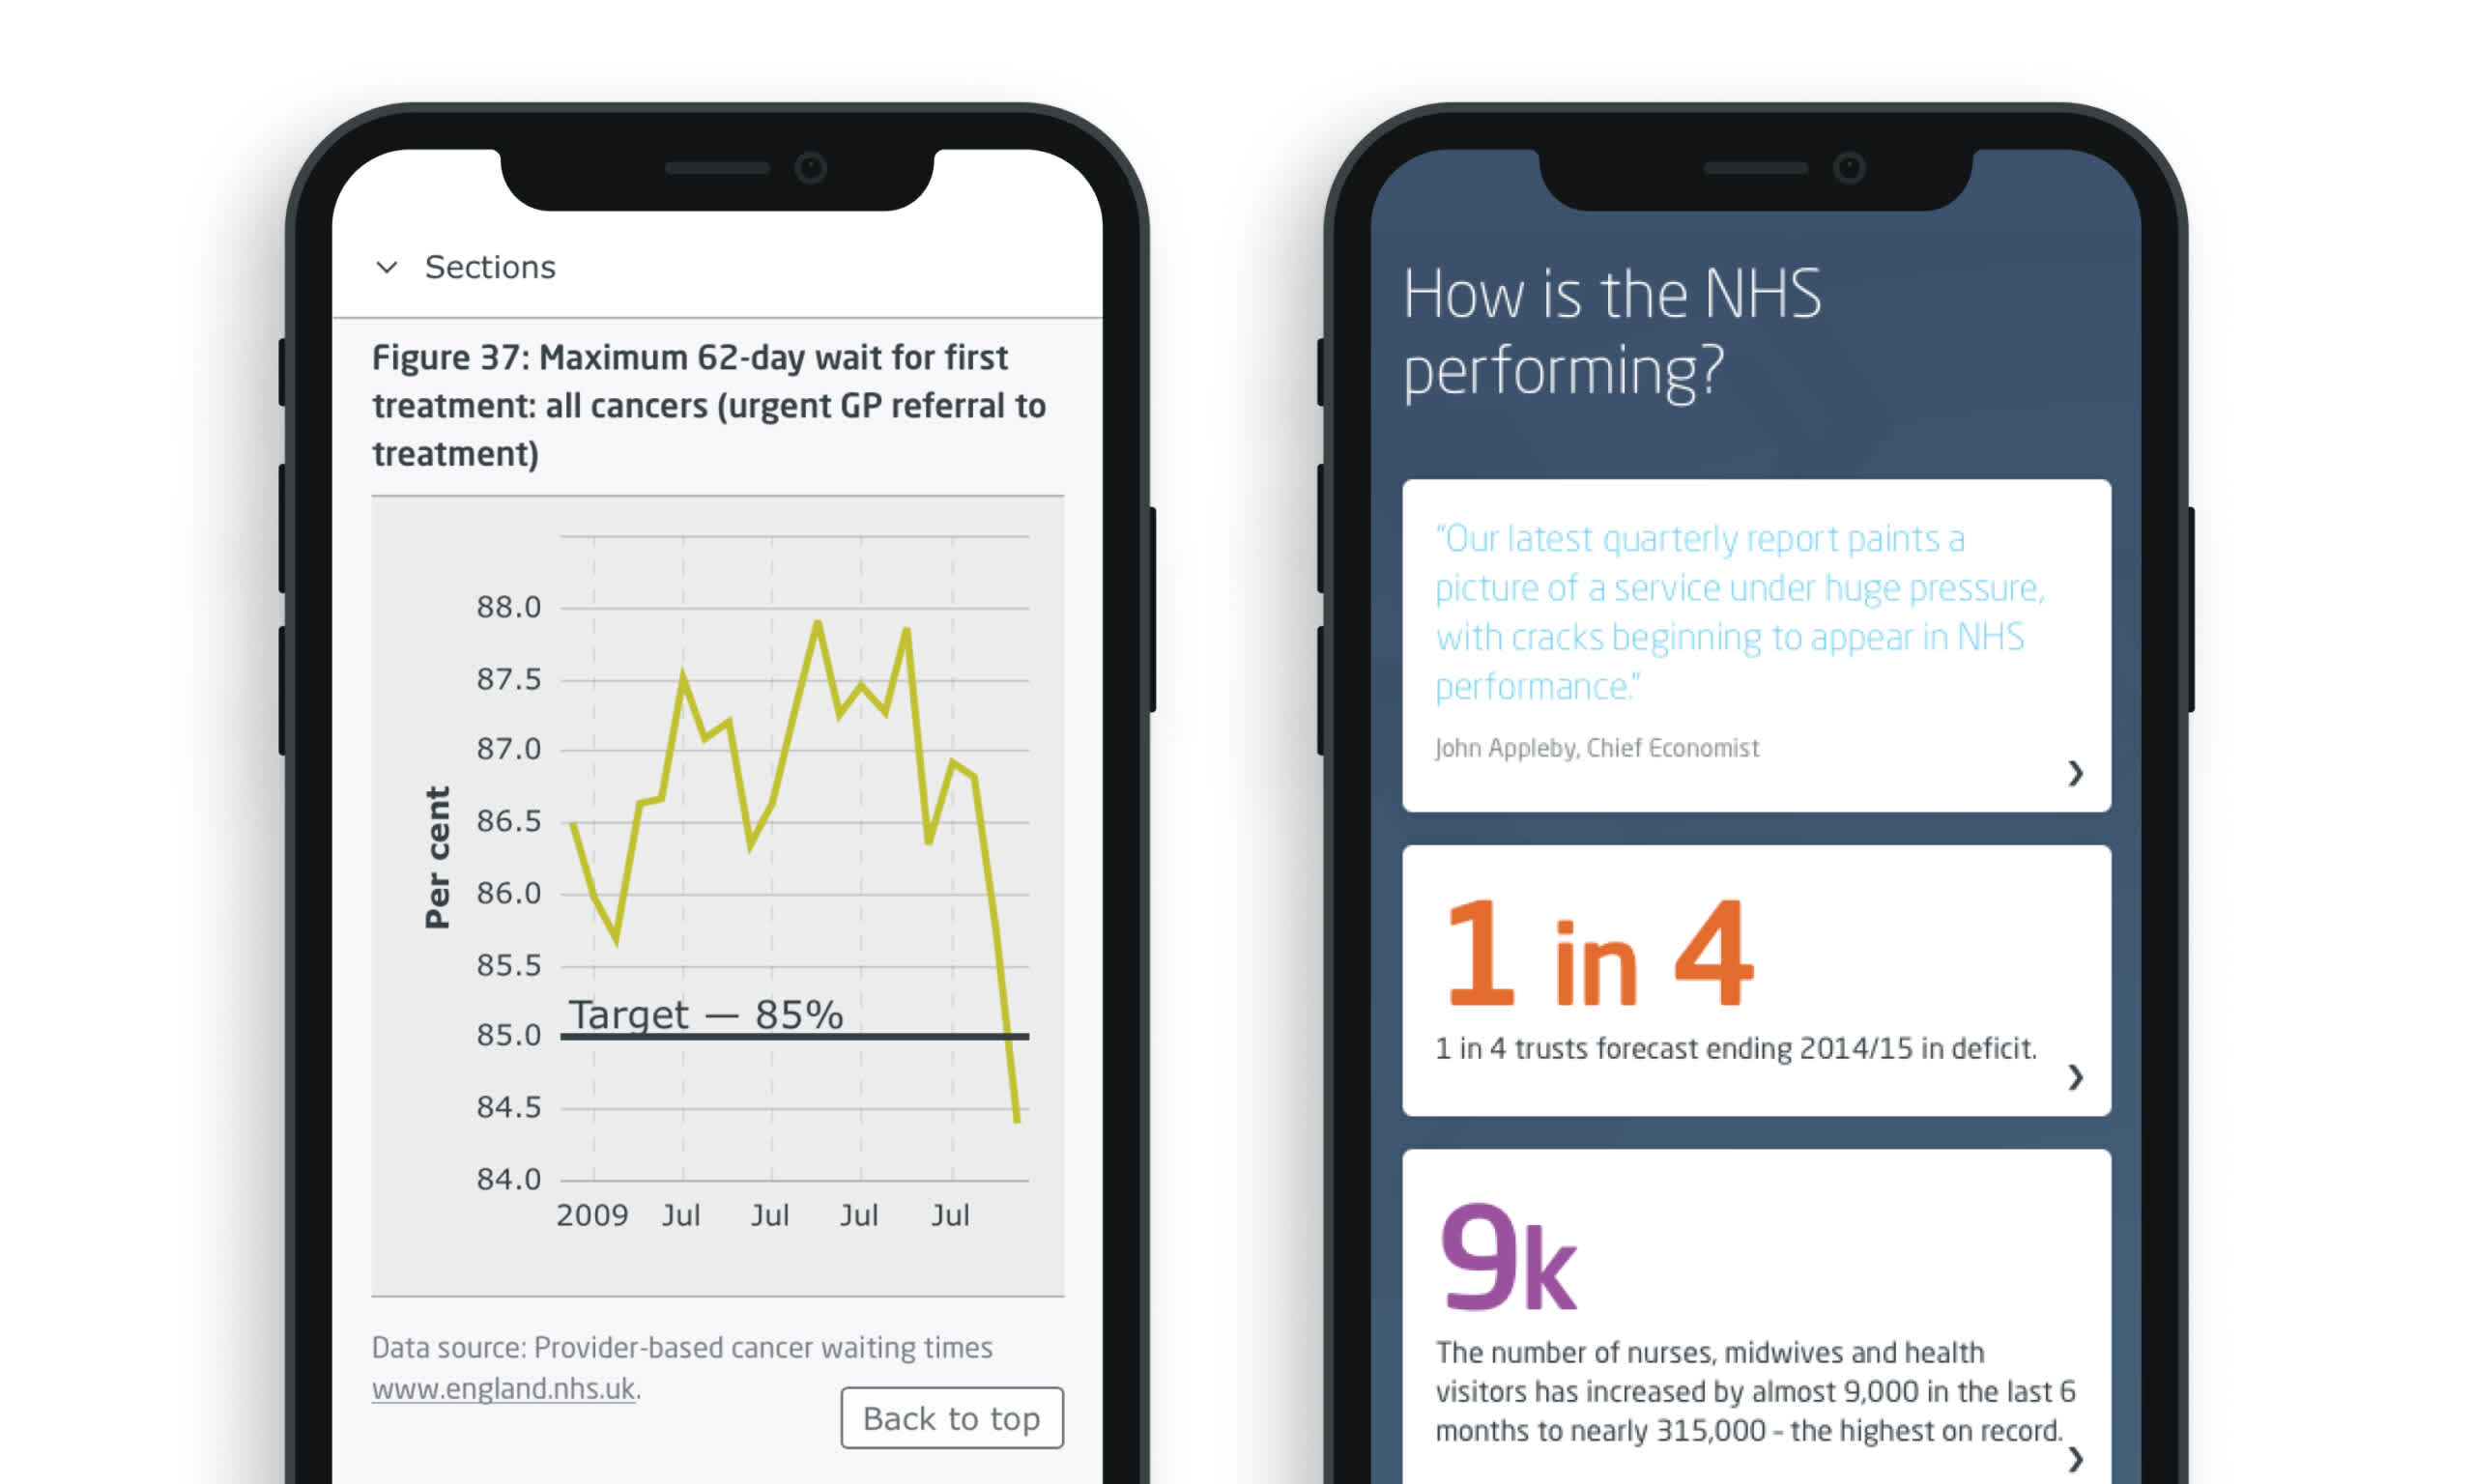 Two mobile mockups of the King's Fund website - the pages show a line graph illustrating the maximum wait for first time cancer treatment and the second illustrated data on how the NHS is performing